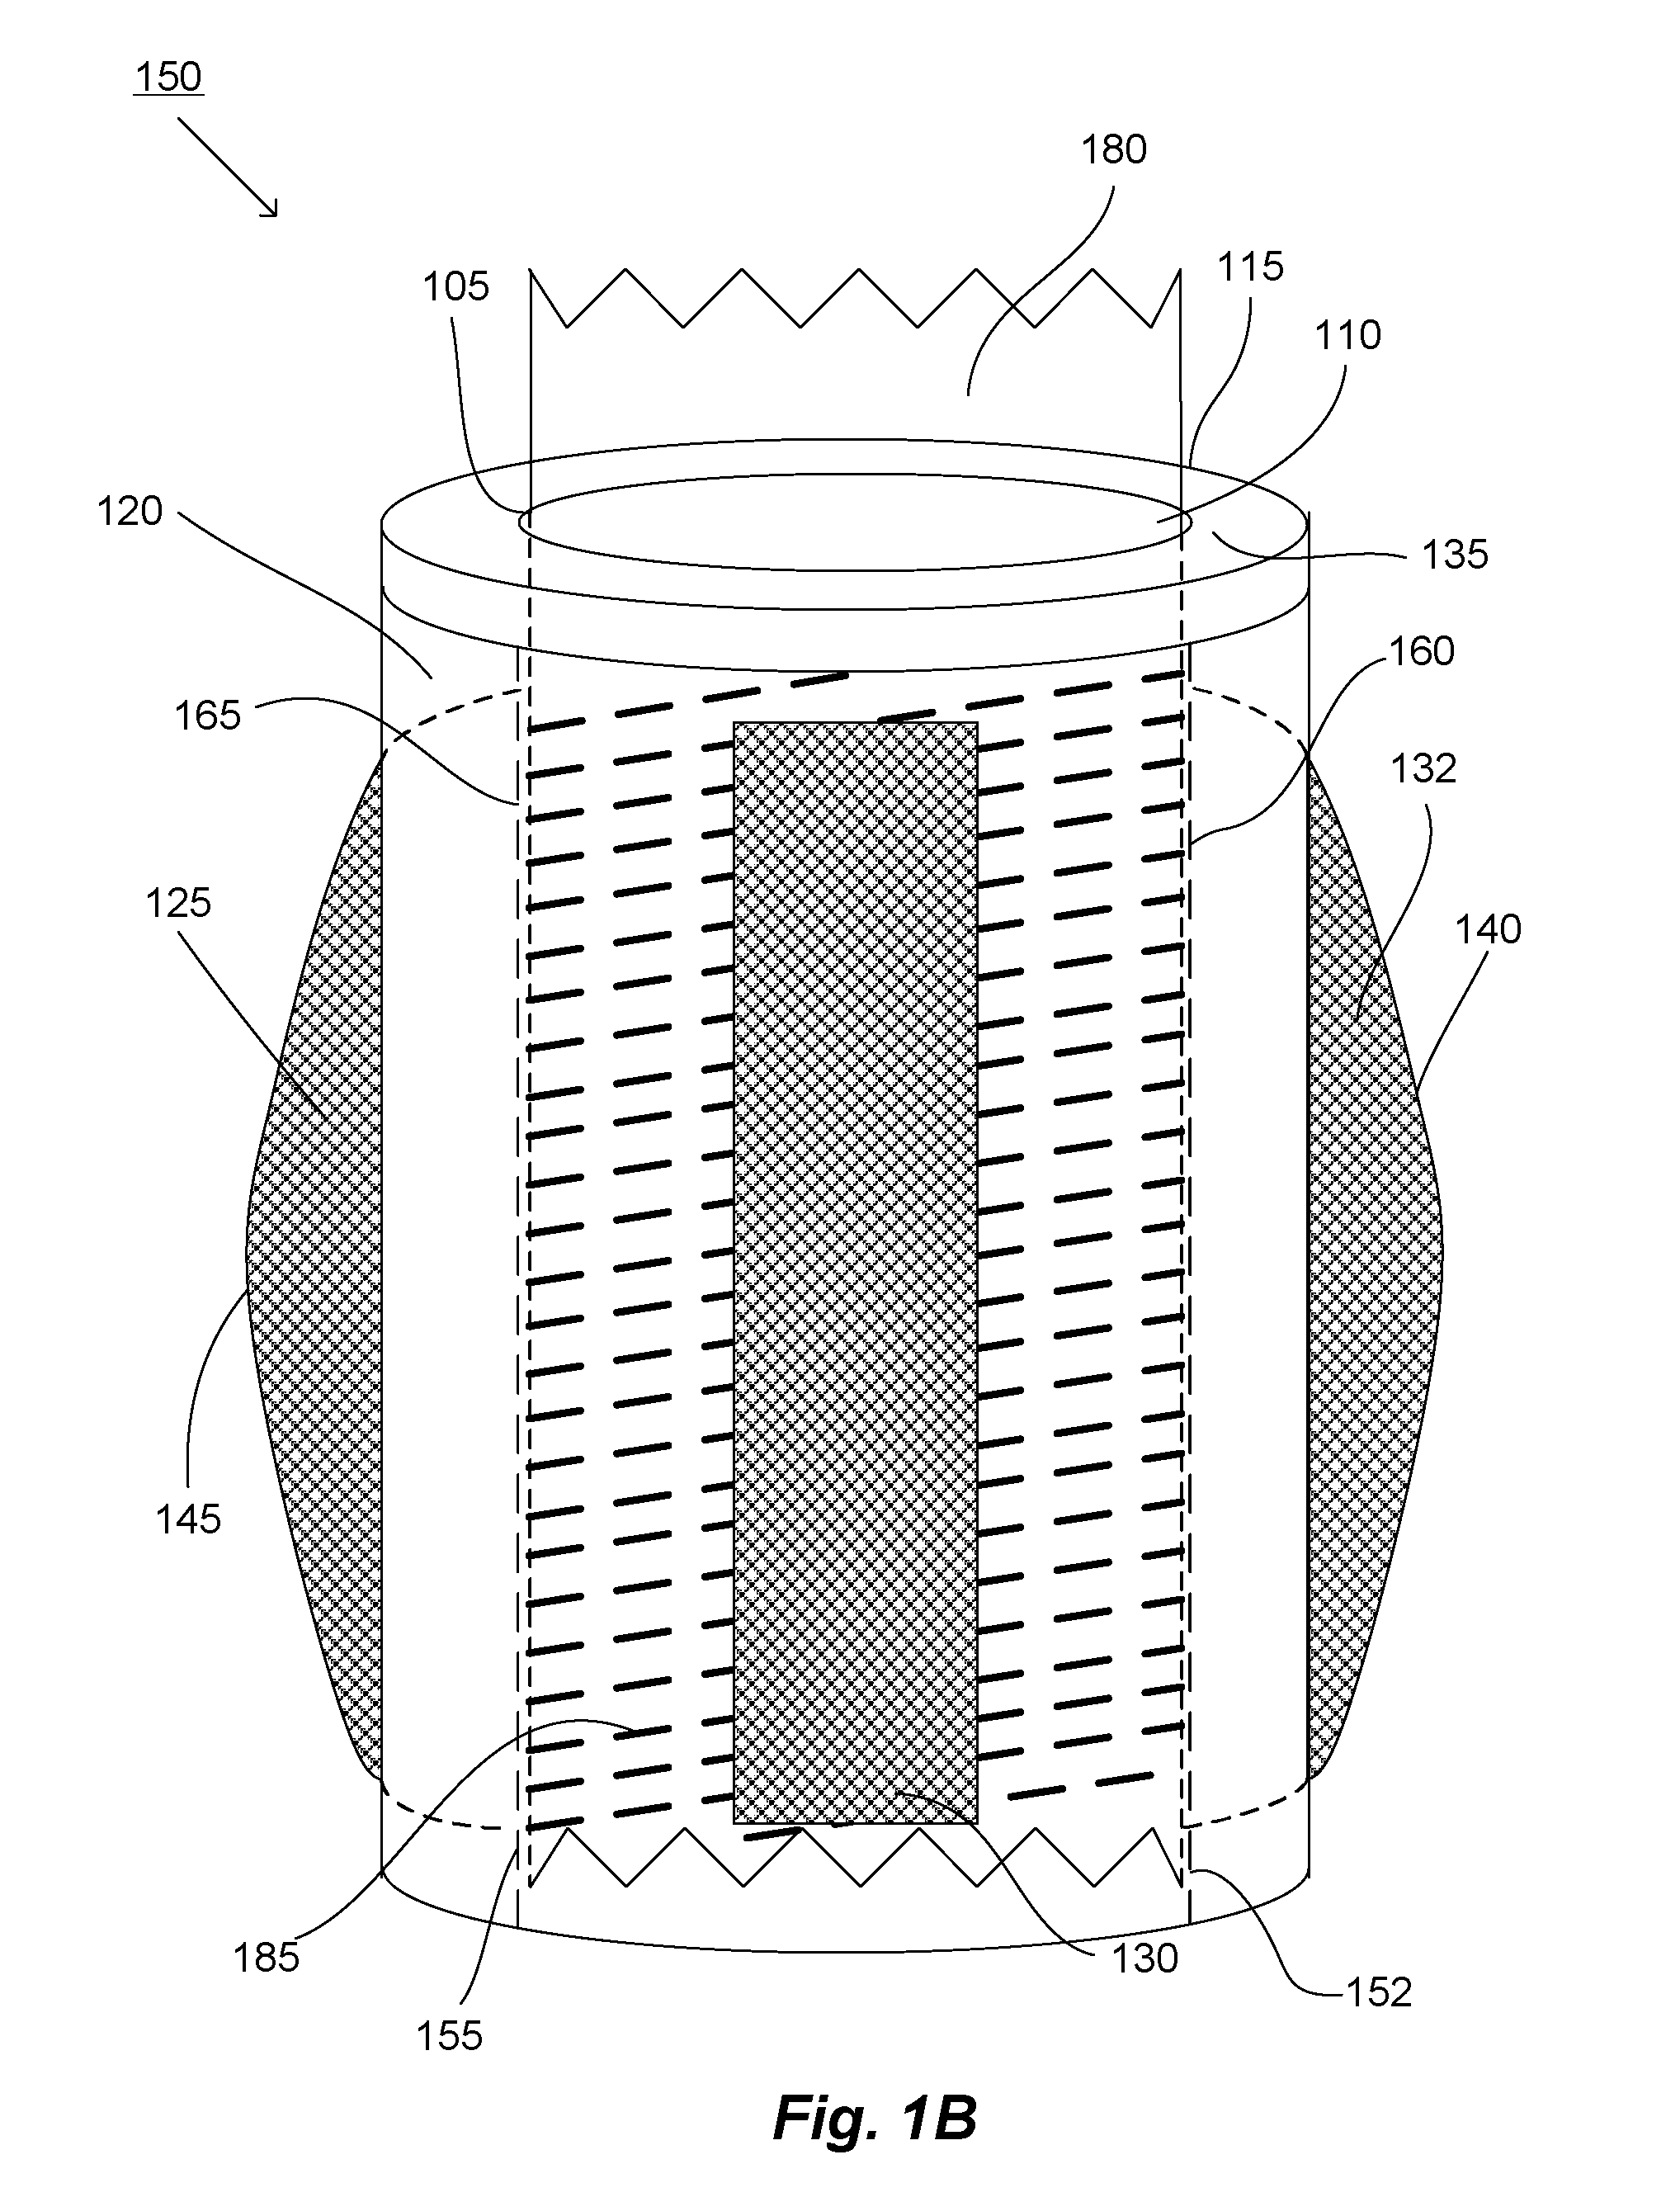 Systems and Methods for the Medical Treatment of Structural Tissue